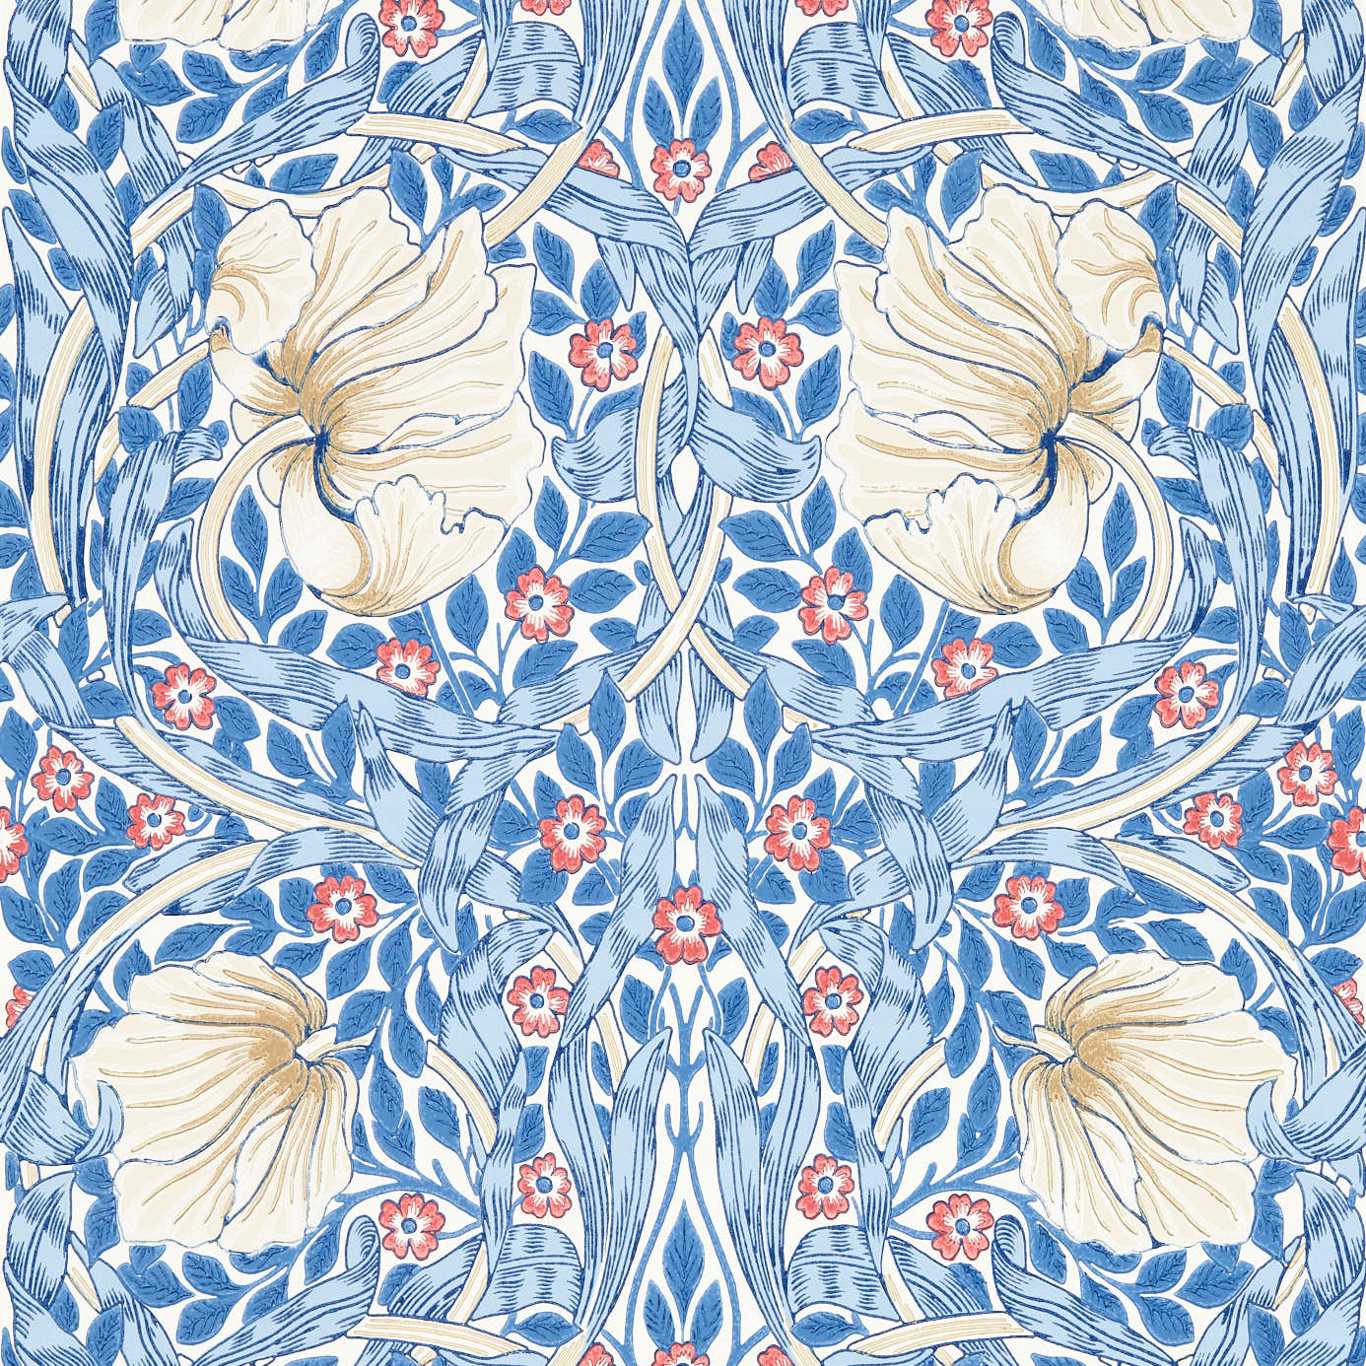 Pimpernel Woad Wallpaper MSIM217062 by Morris & Co